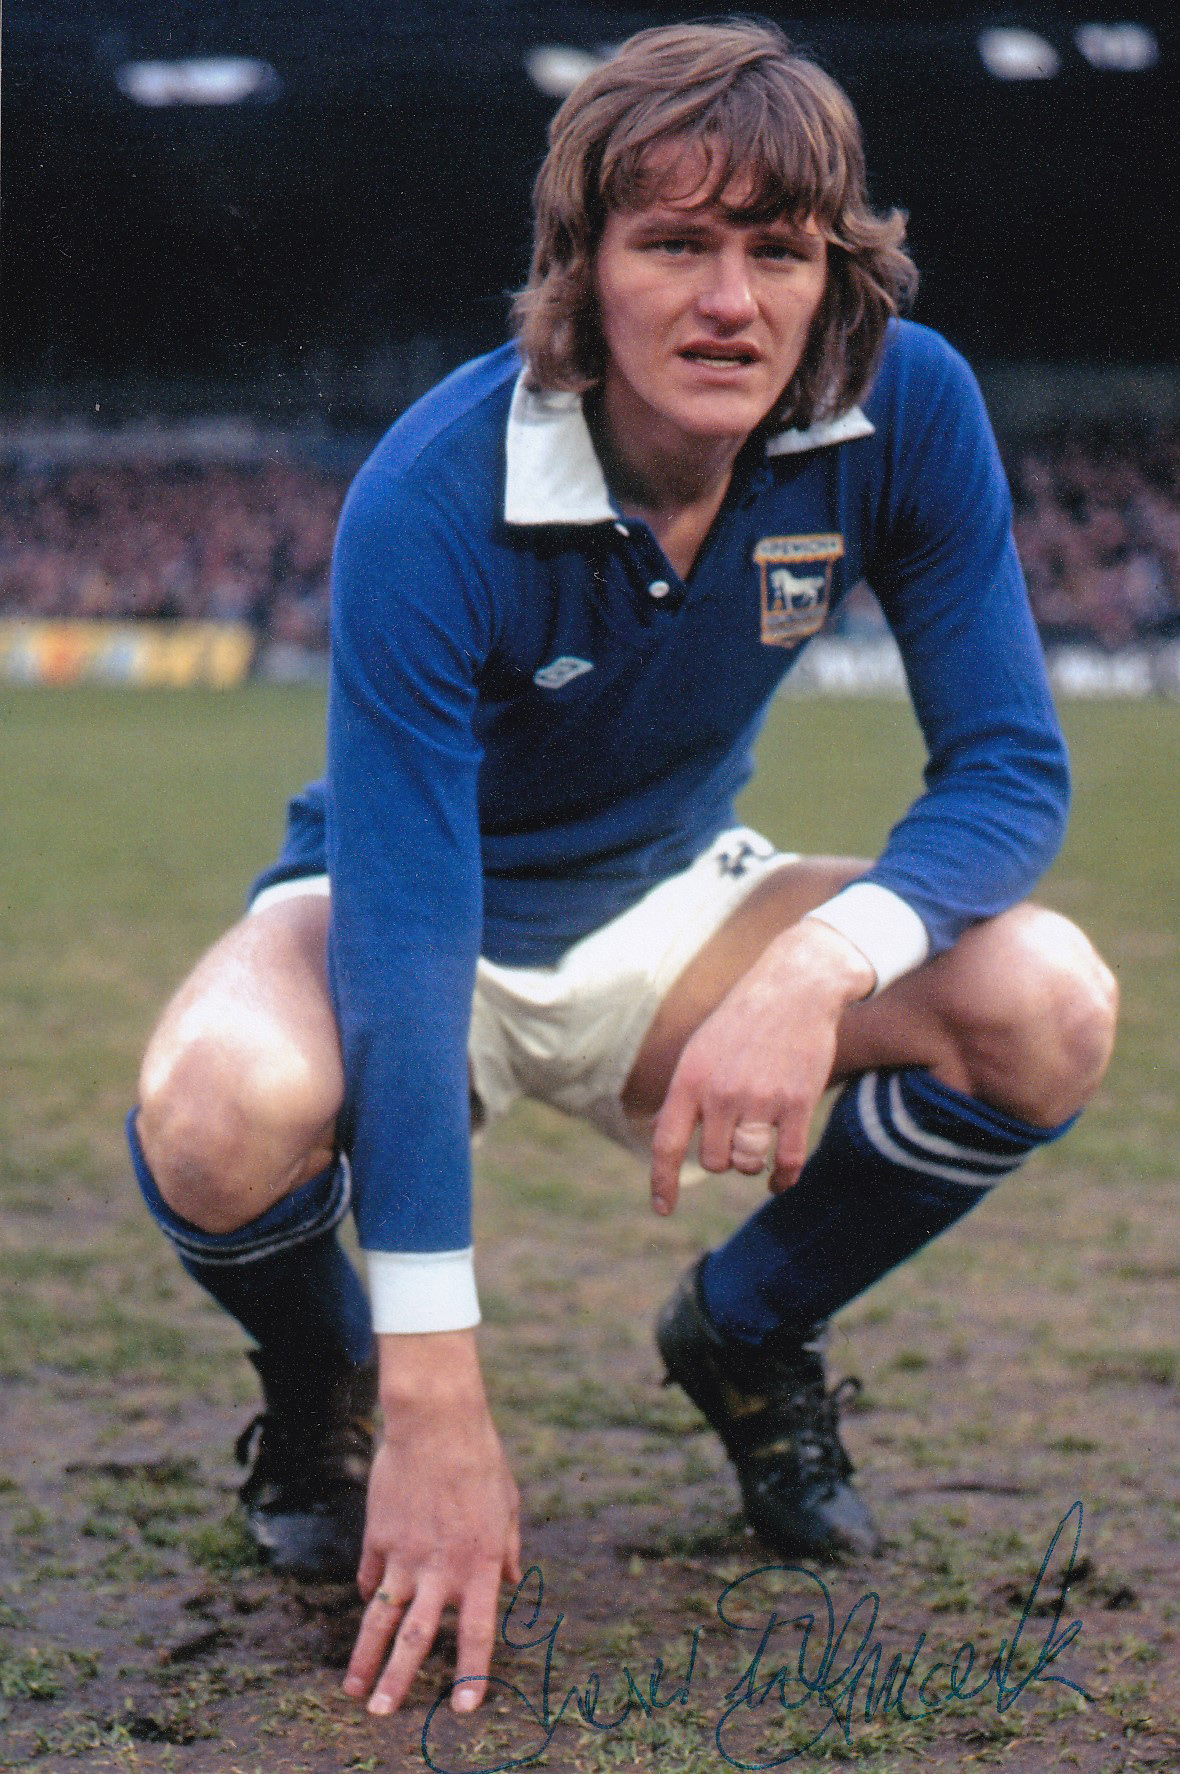 Autographed TREVOR WHYMARK 6 x 4 Photo : Col, depicting Ipswich Town centre-forward TREVOR WHYMARK